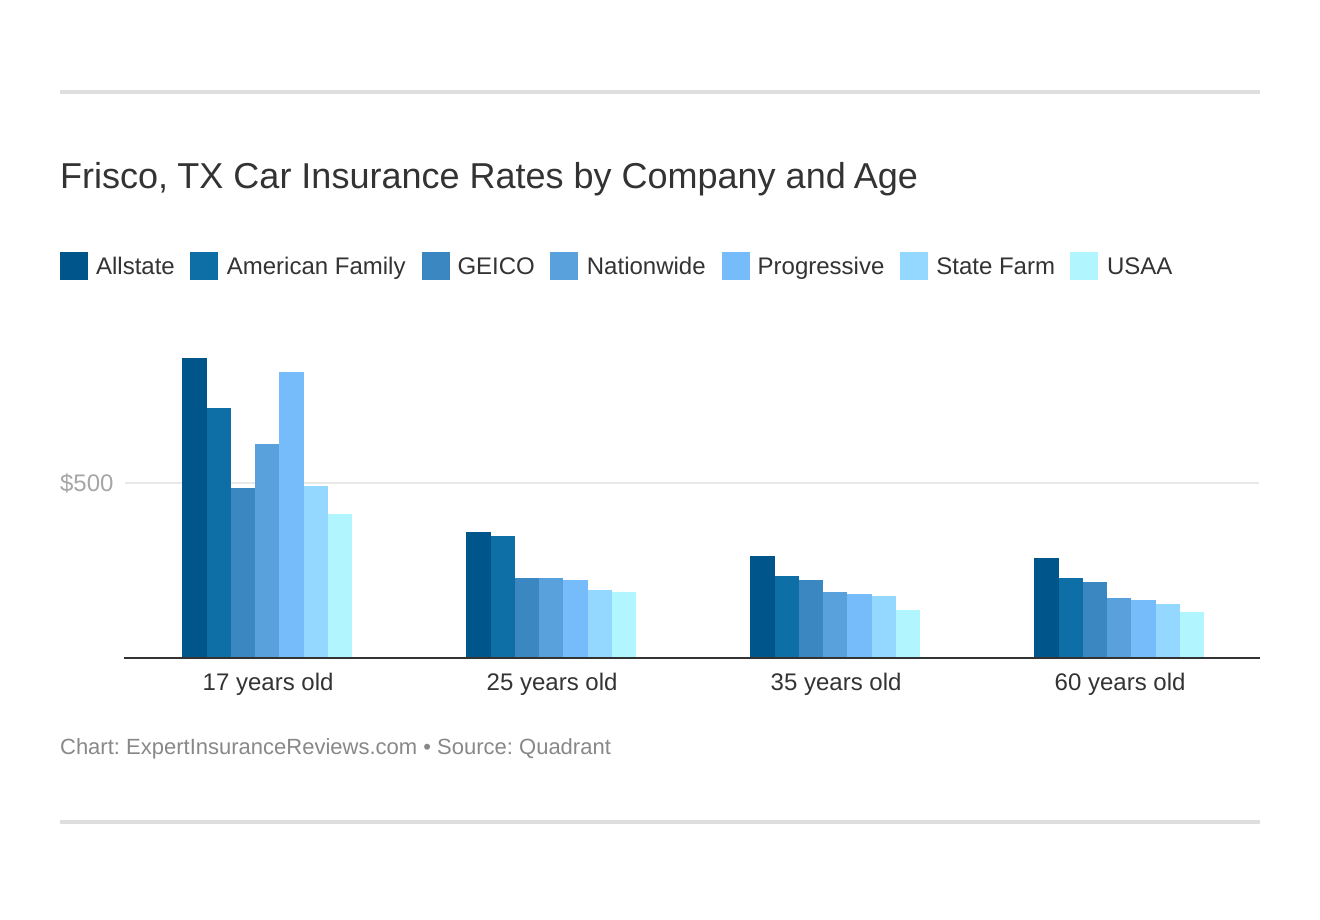 Frisco, TX Car Insurance Rates by Company and Age